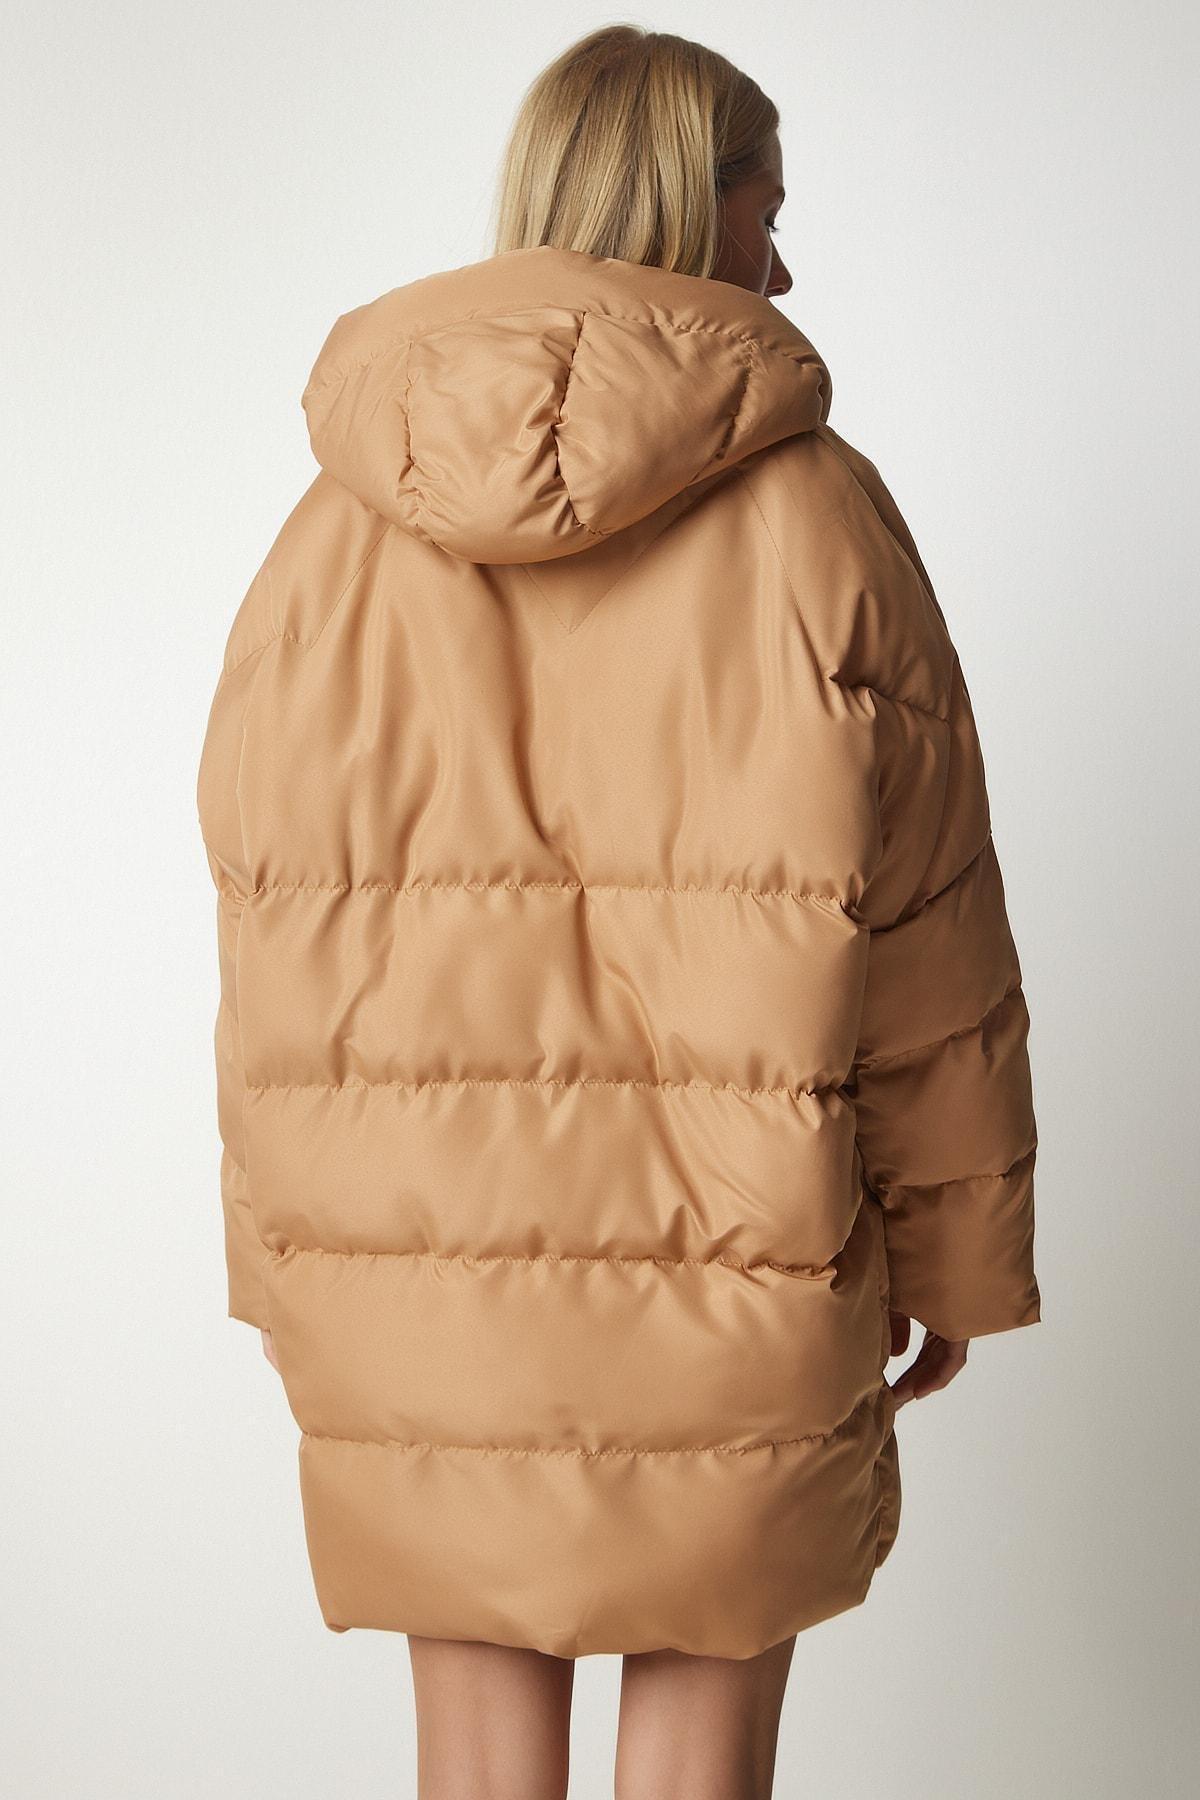 Happiness Istanbul - Beige Hooded Oversized Puffer Coat